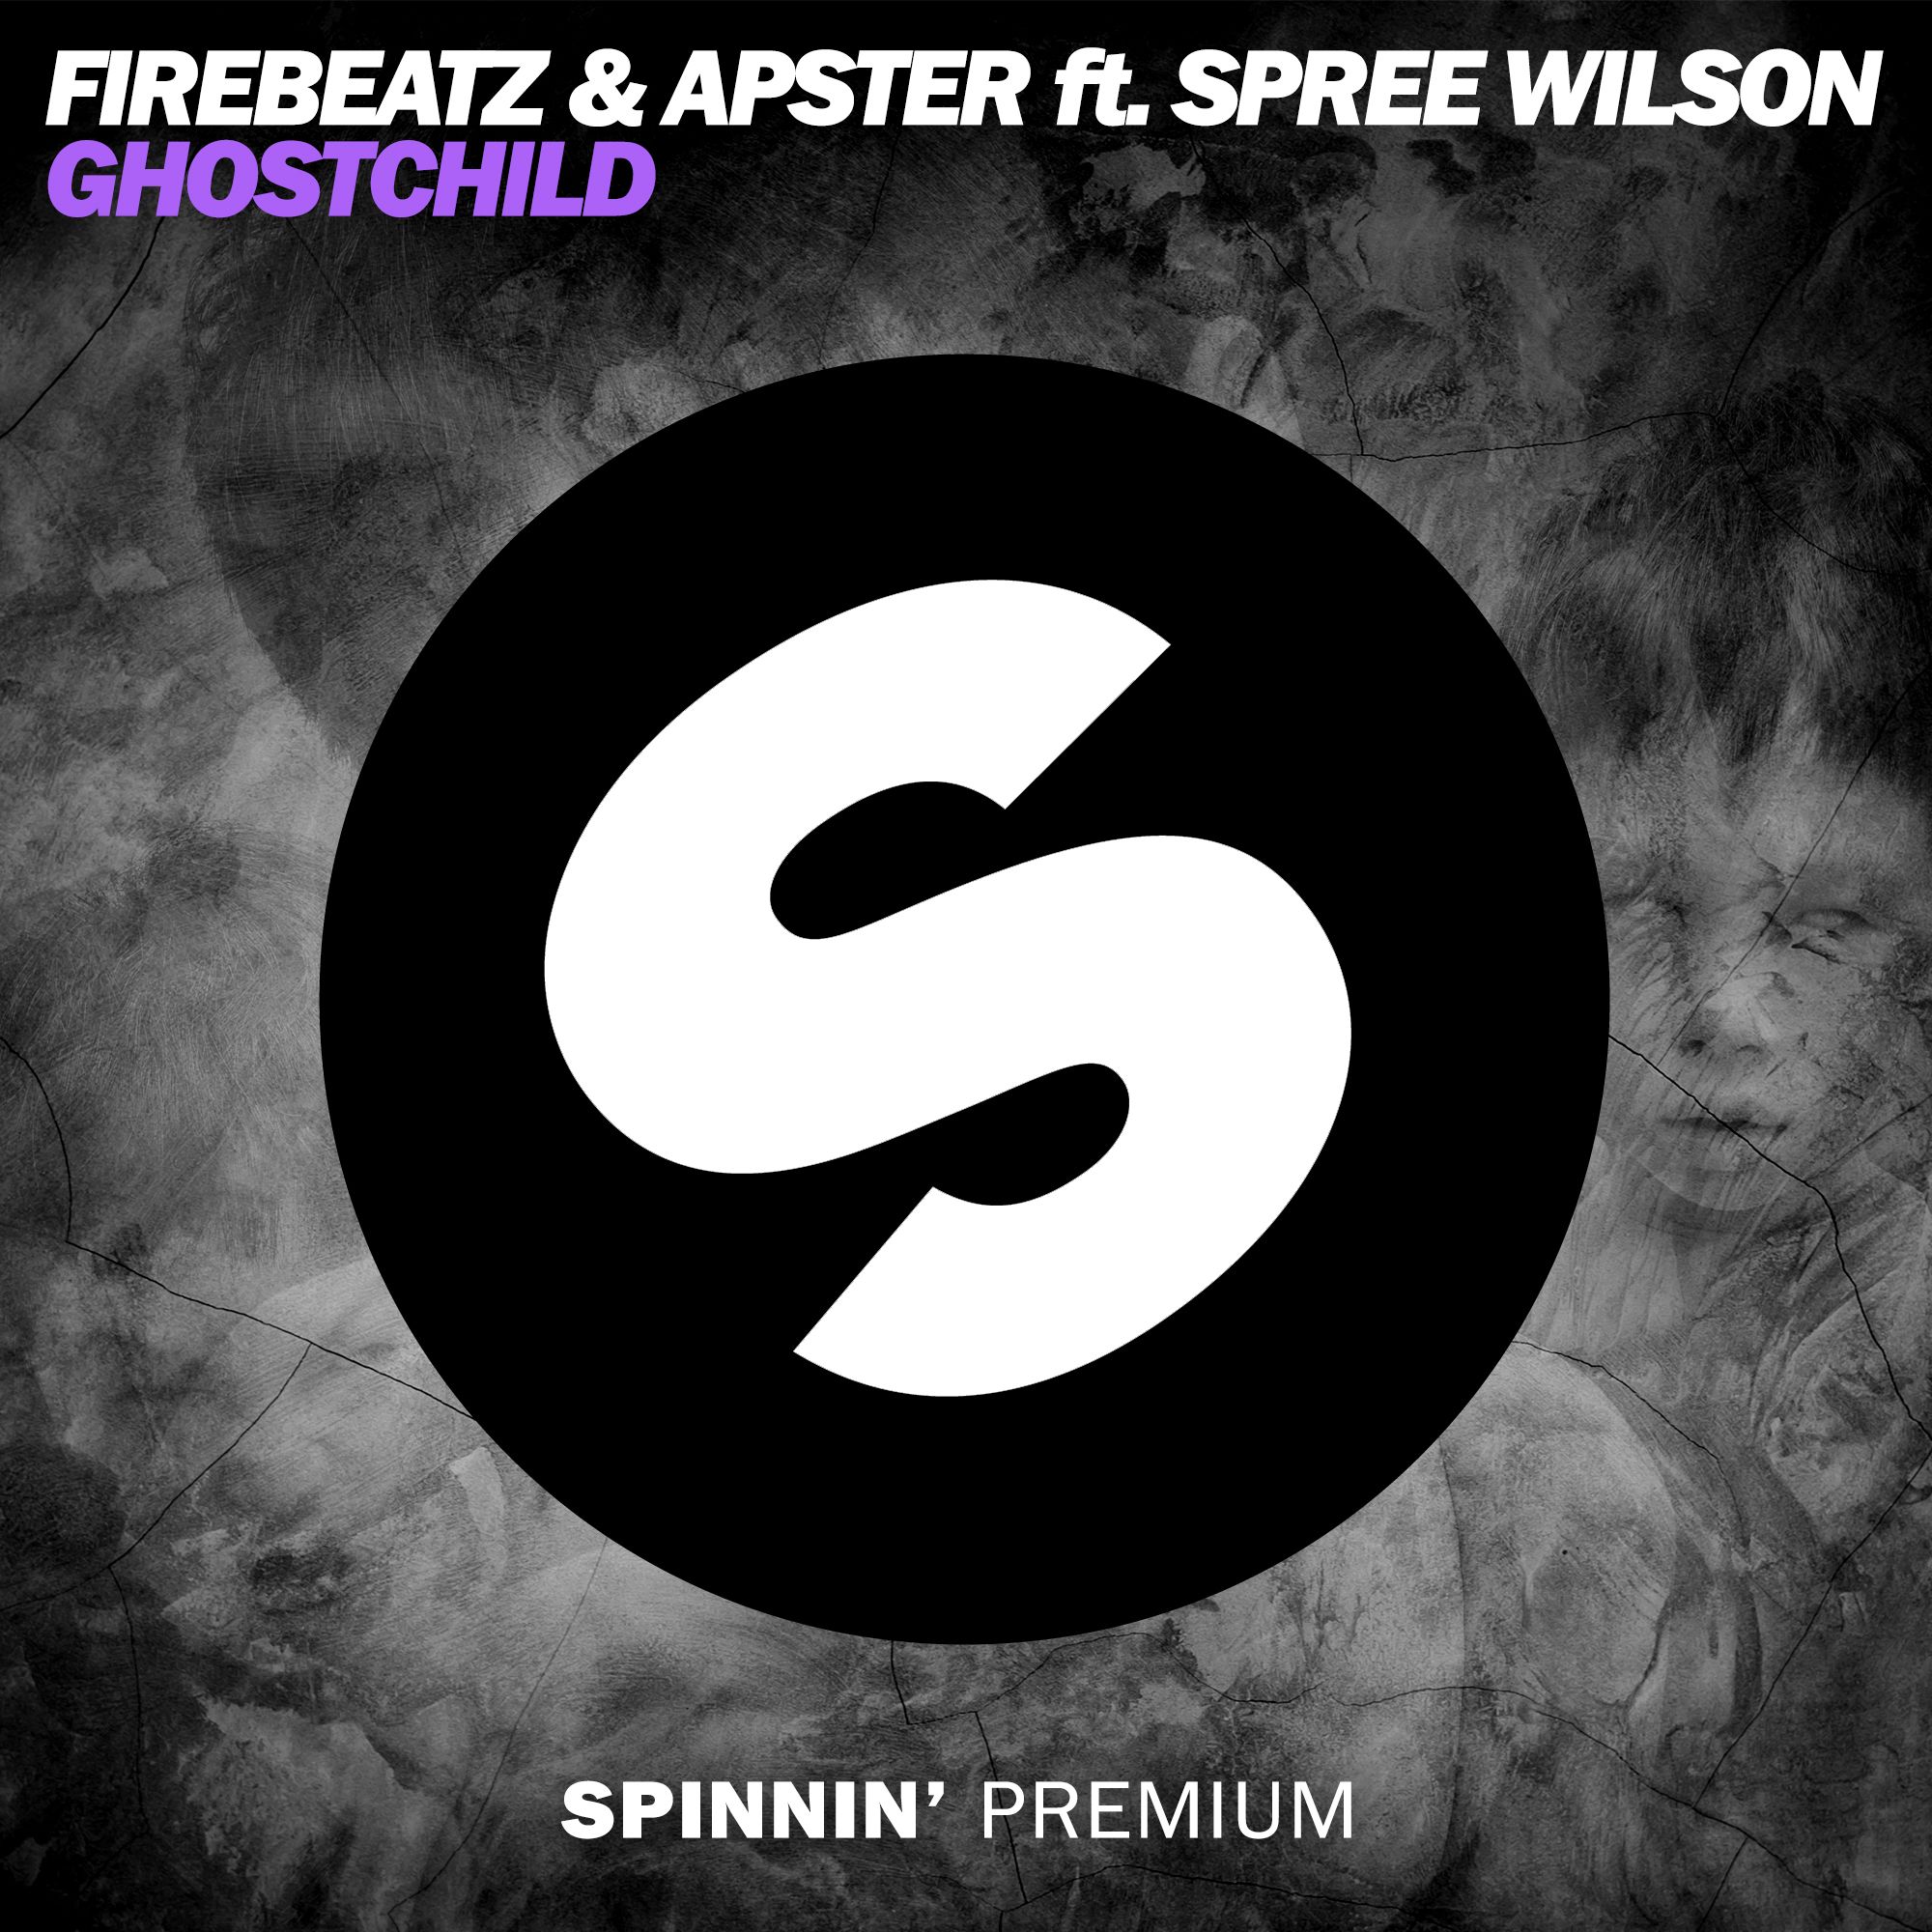 Firebeatz & Apster ft. Spree Wilson - Ghostchild (Extended Mix) [OUT NOW]